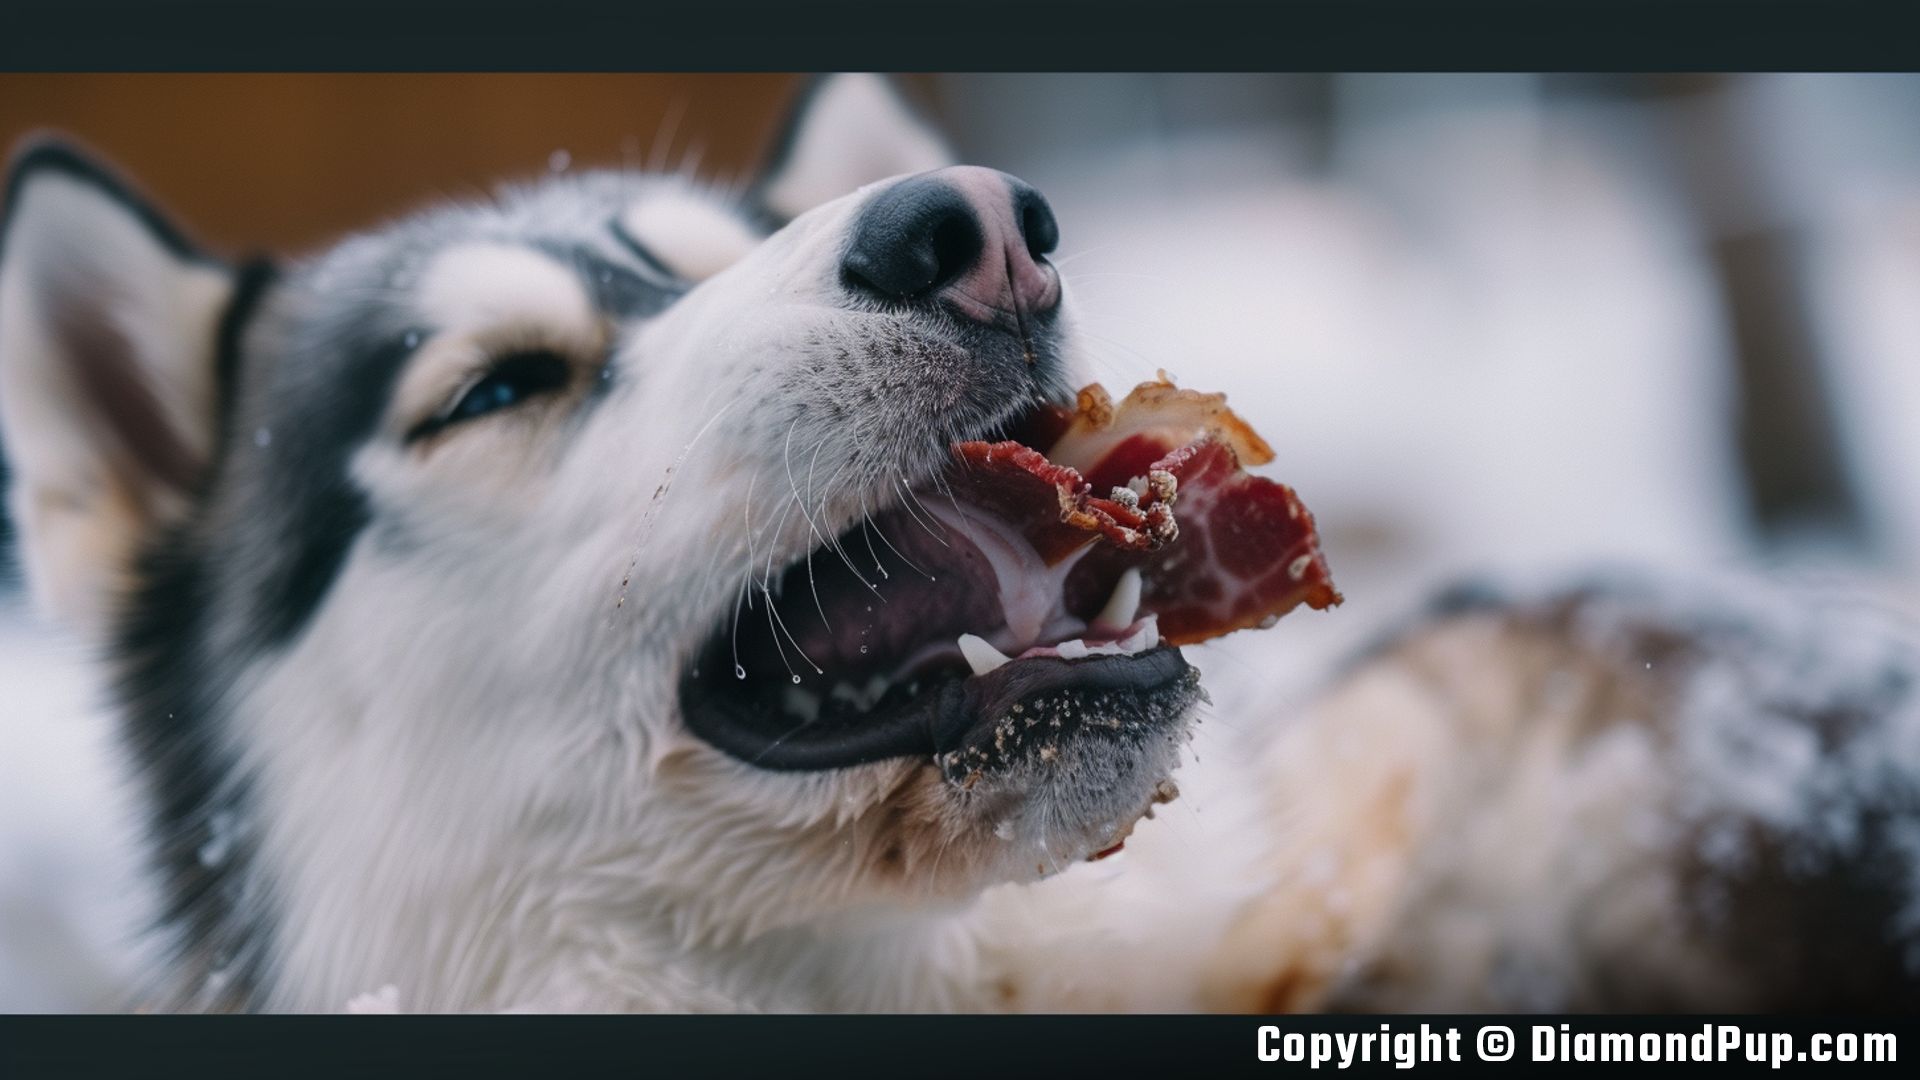 Photograph of a Playful Husky Snacking on Bacon